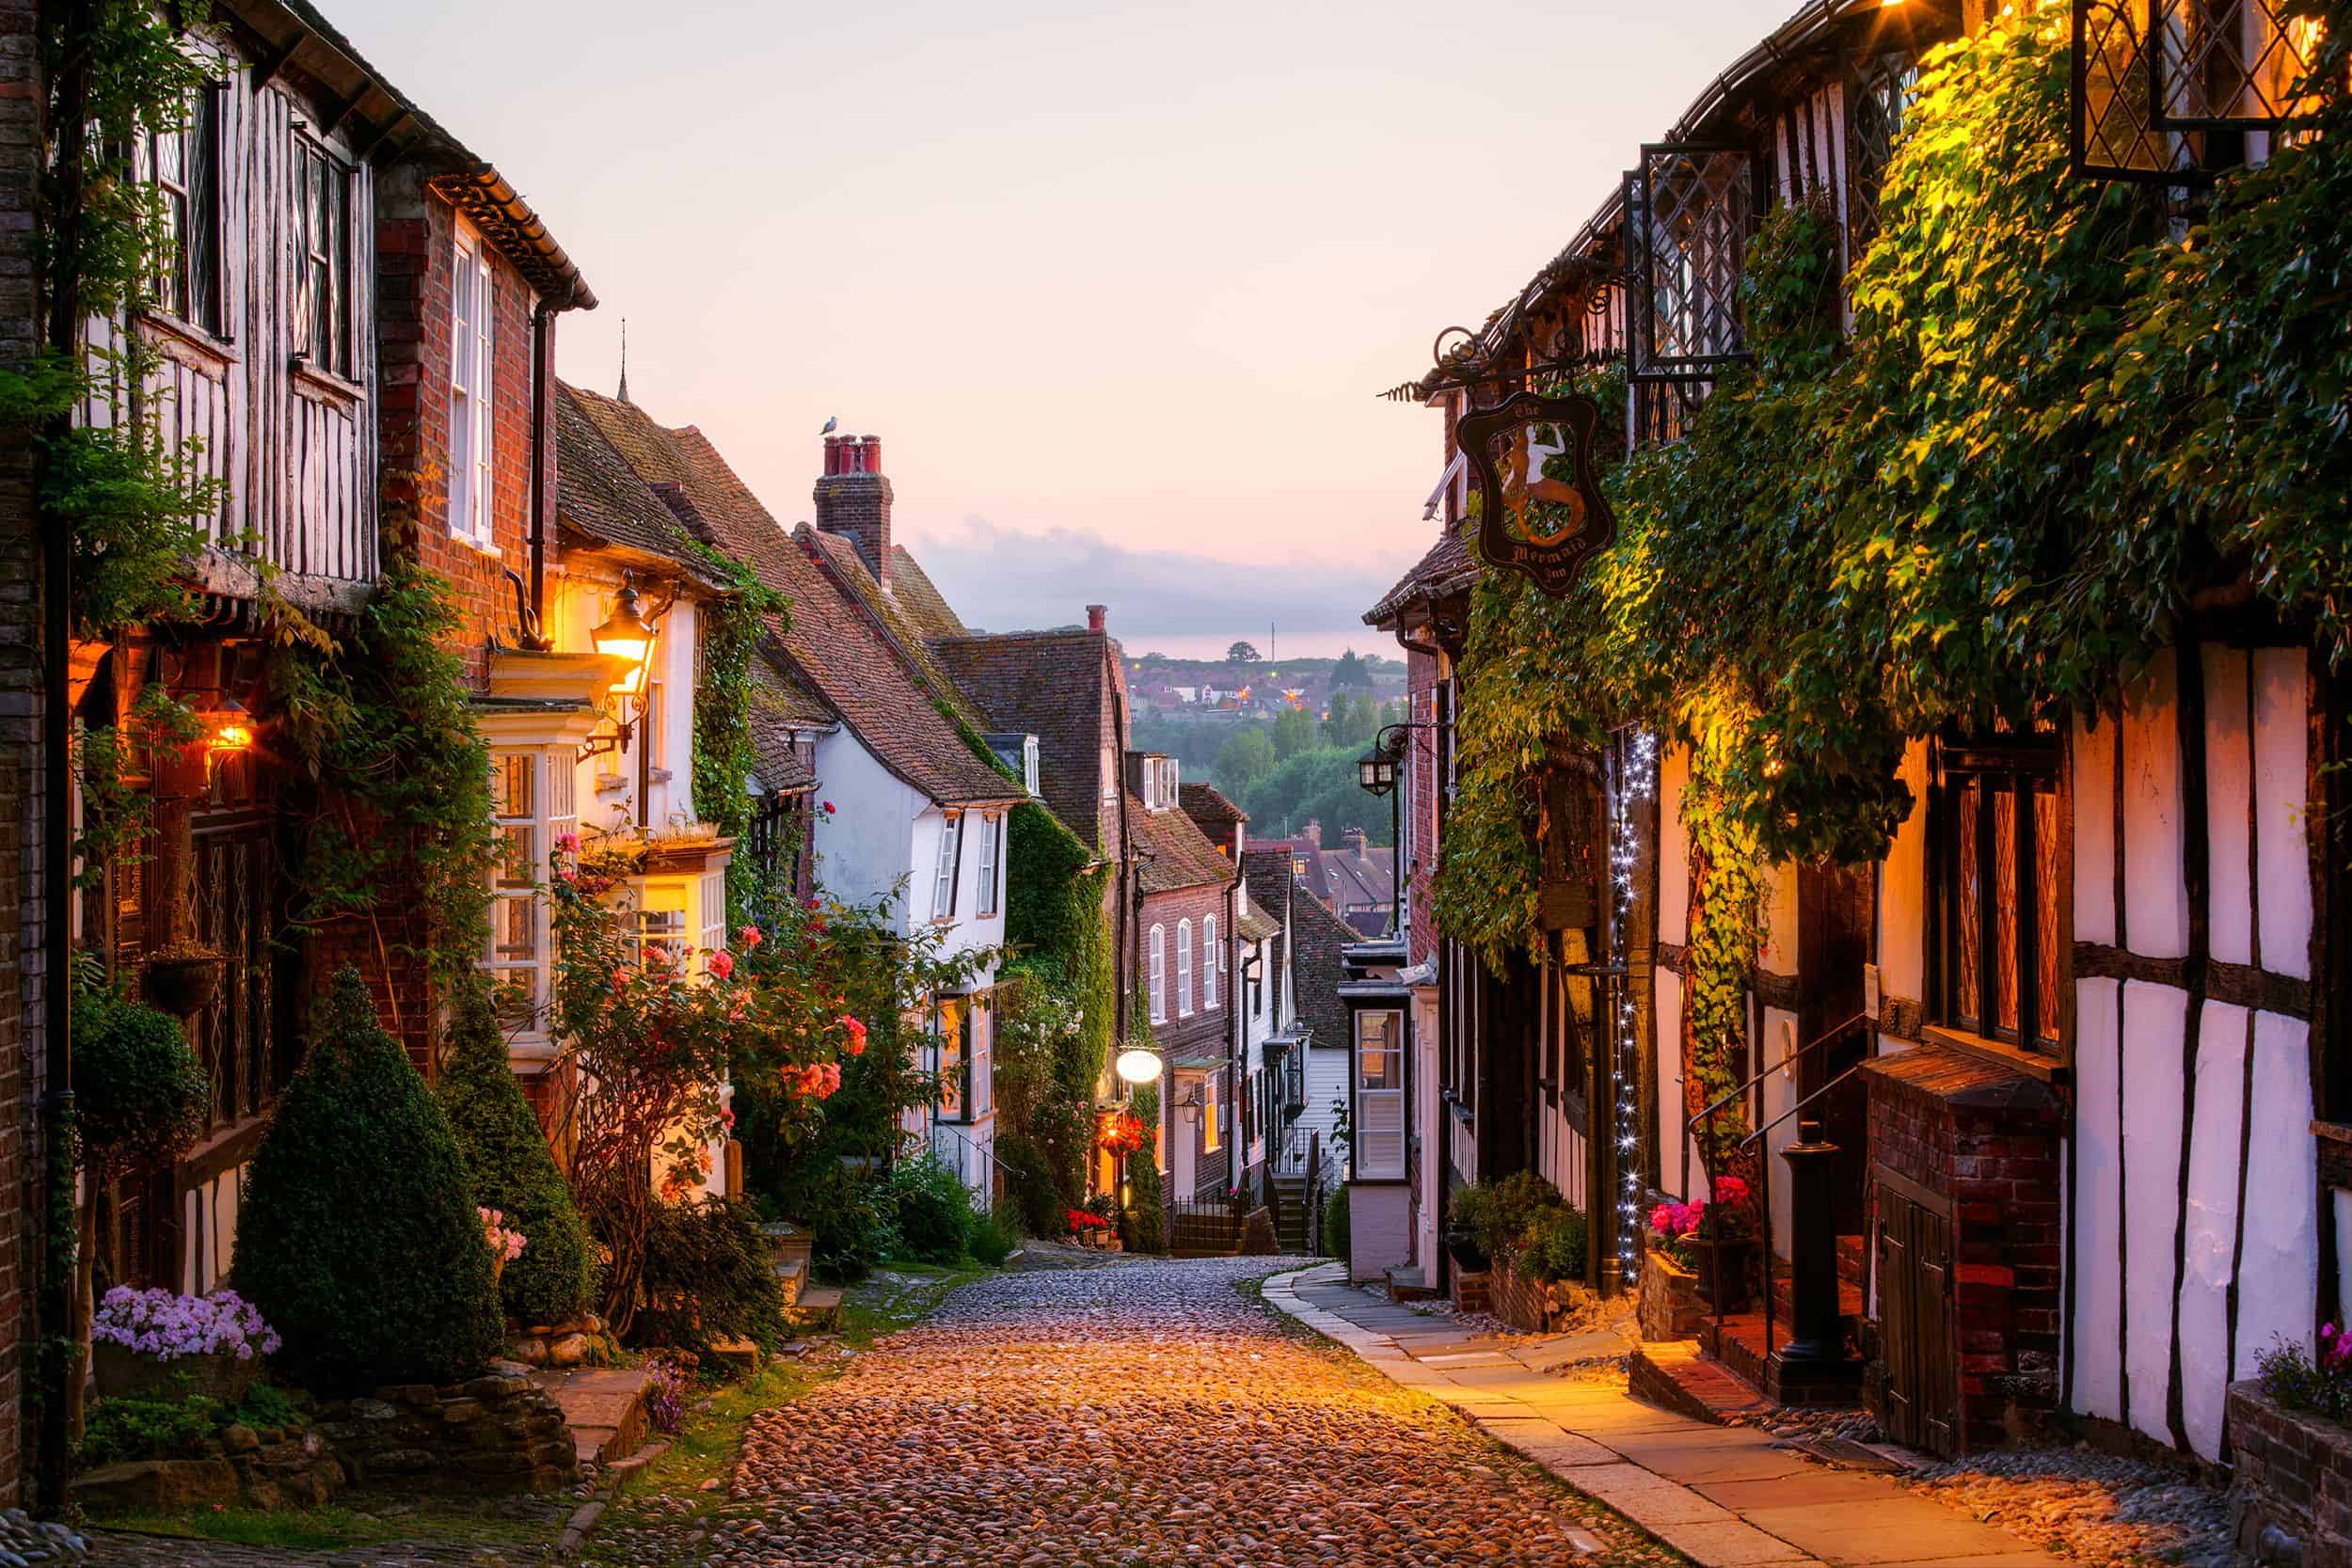 The historic town of Rye, East Sussex.